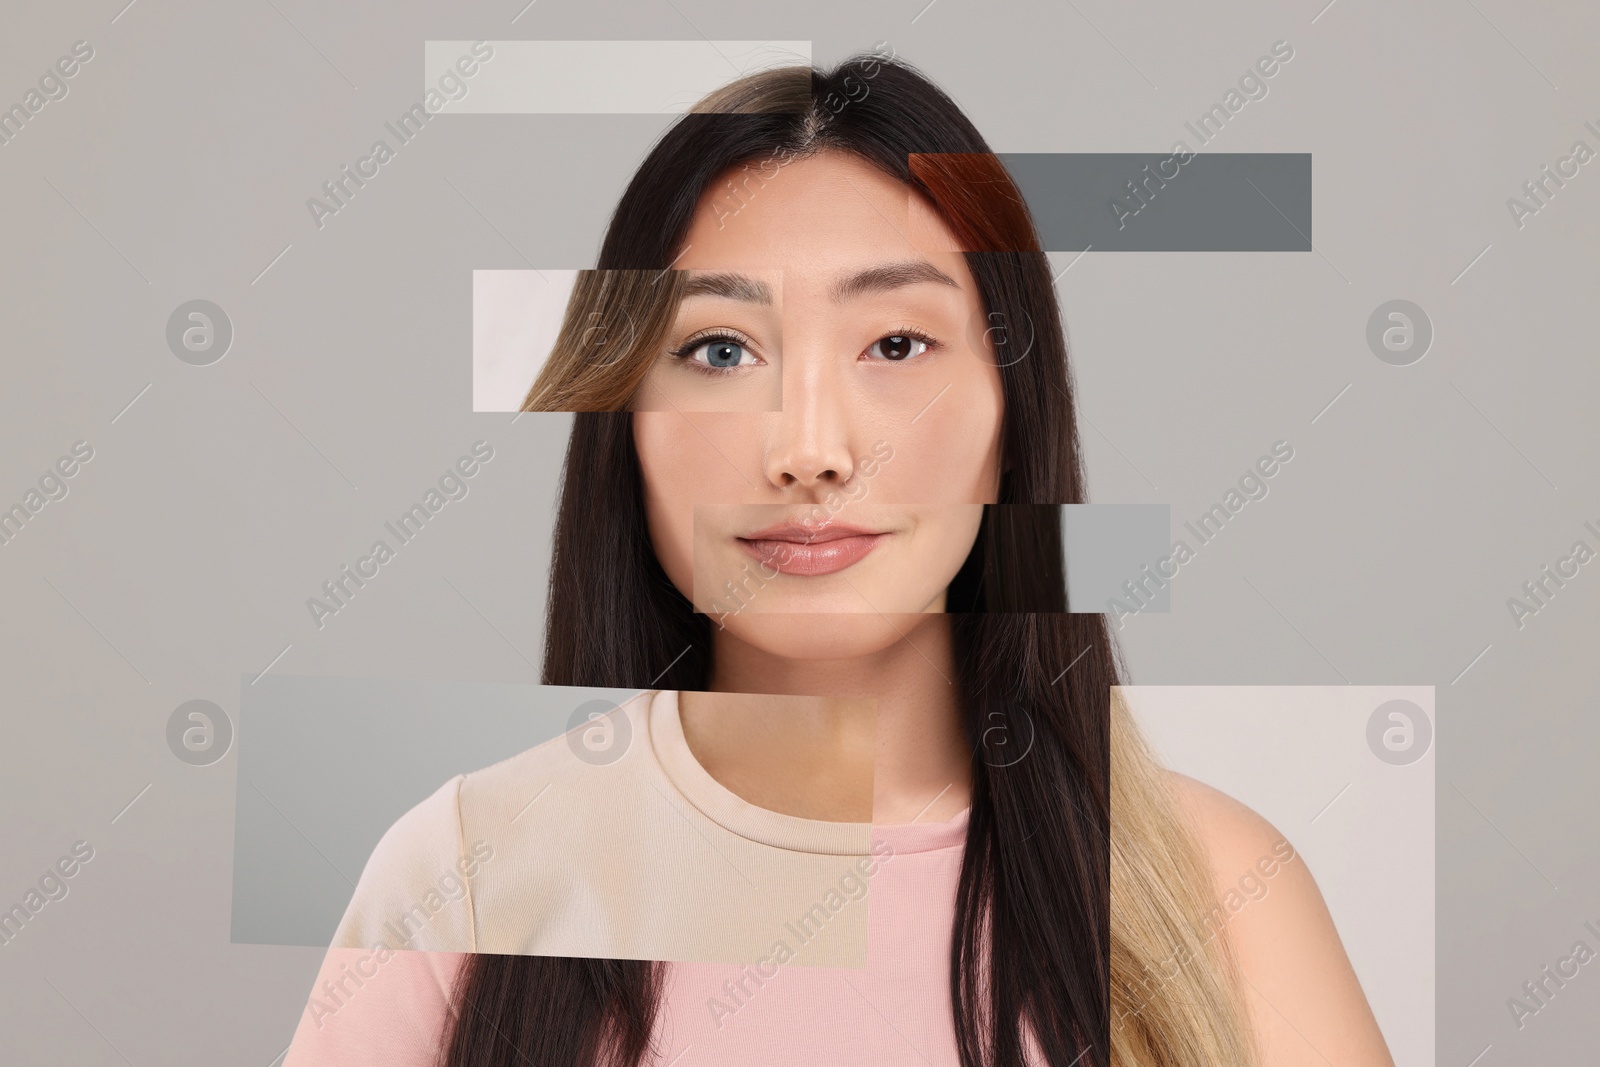 Image of Combined portrait of woman on grey background. Collage with parts of different people's photos